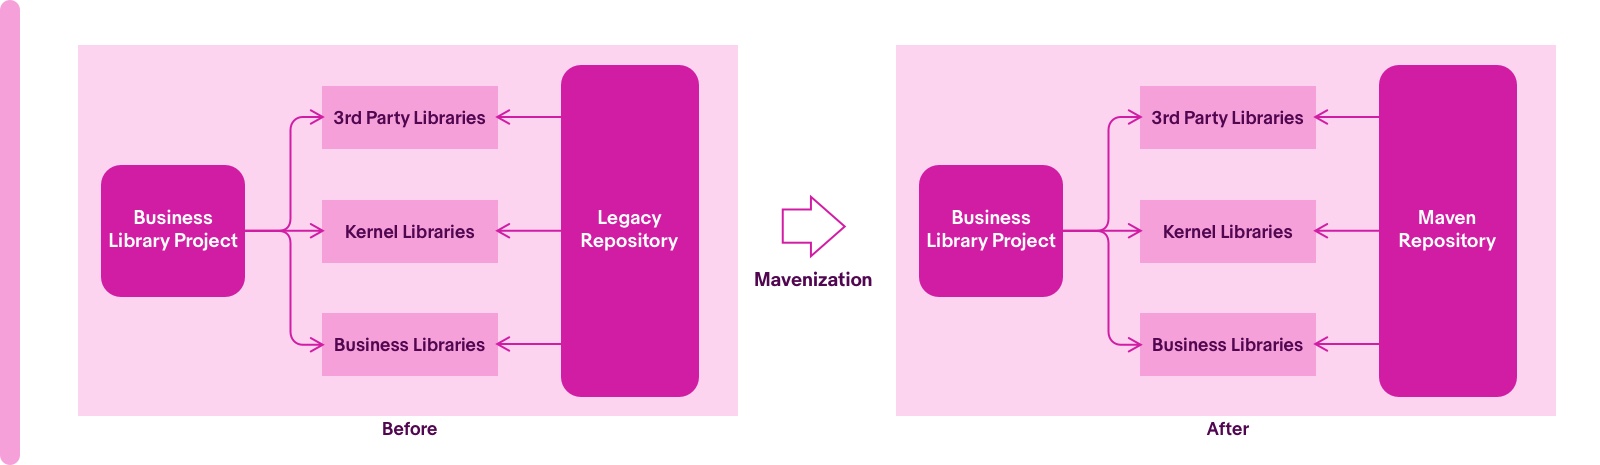 A flowchart describing the process before and after with mavenization